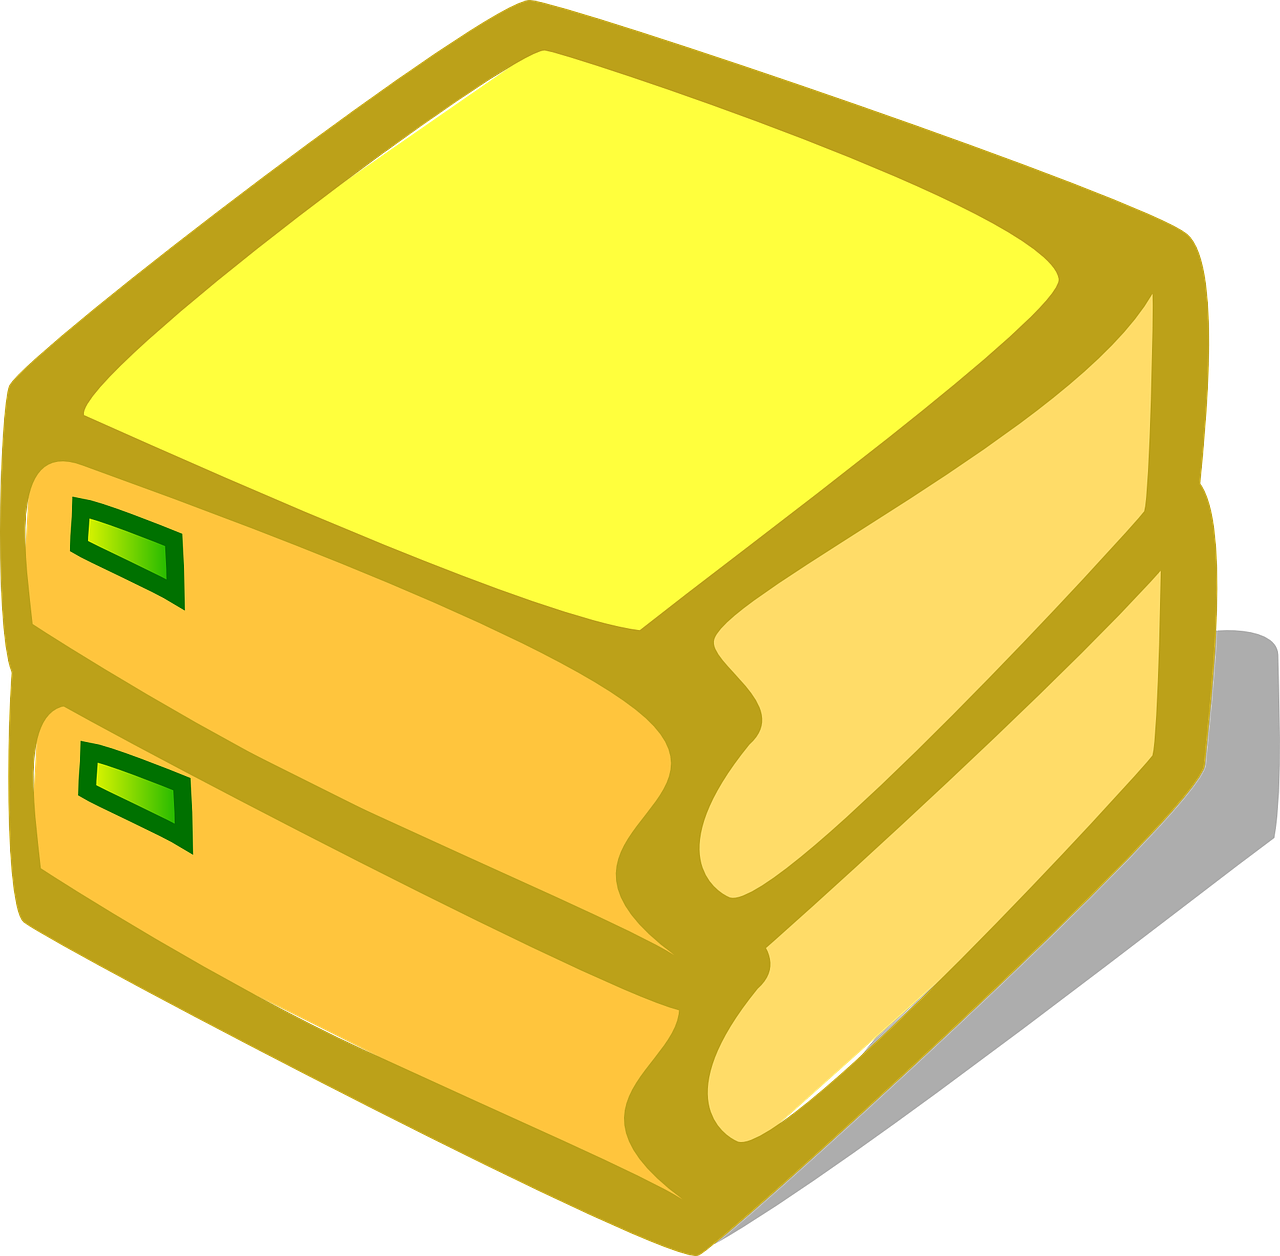 stack yellow packages free photo